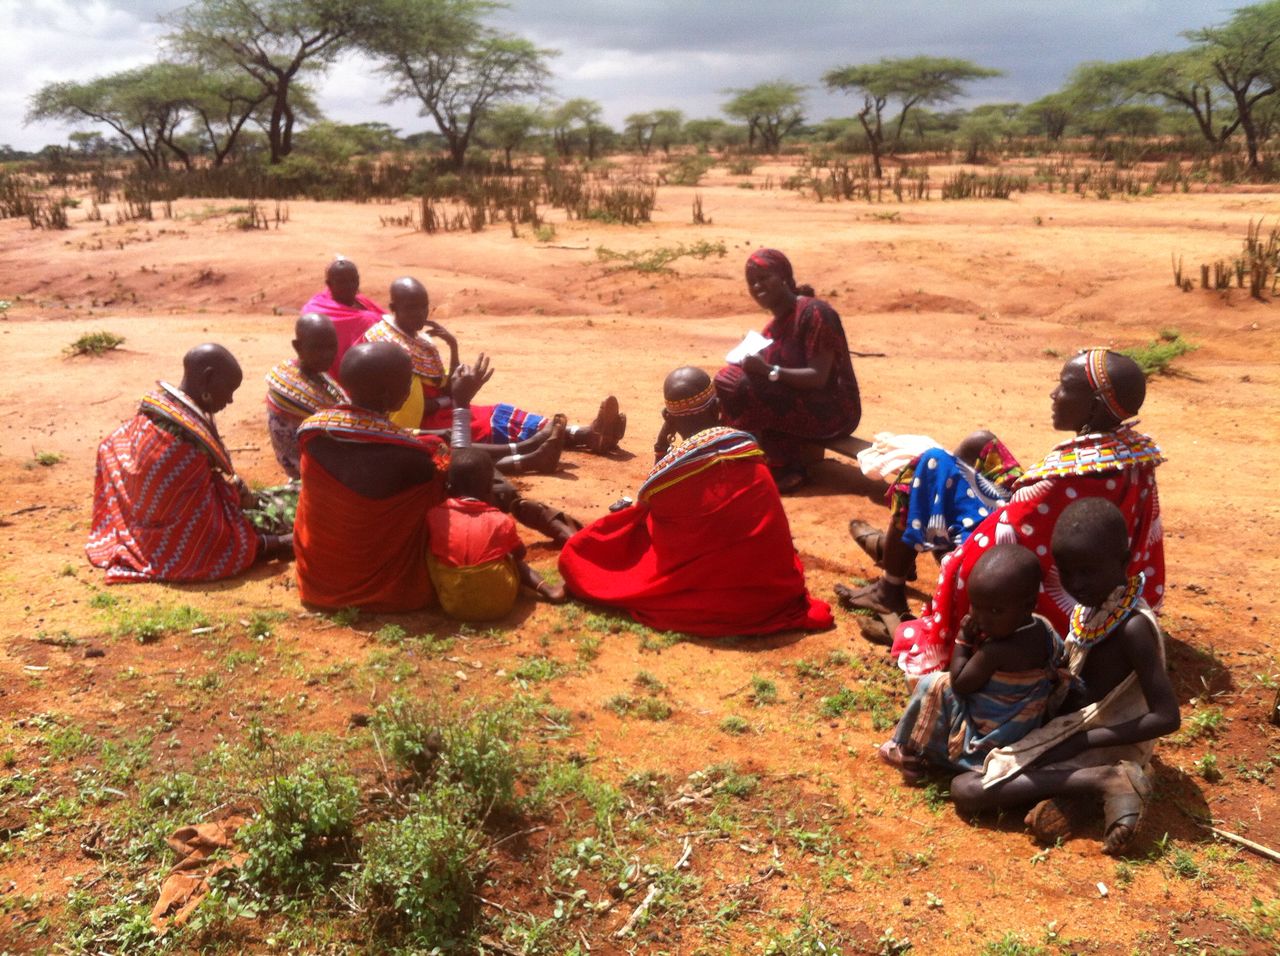 Research assistant, Jaqueline Nalenoi, discussing water security with a group of women in Sessia location, Samburu